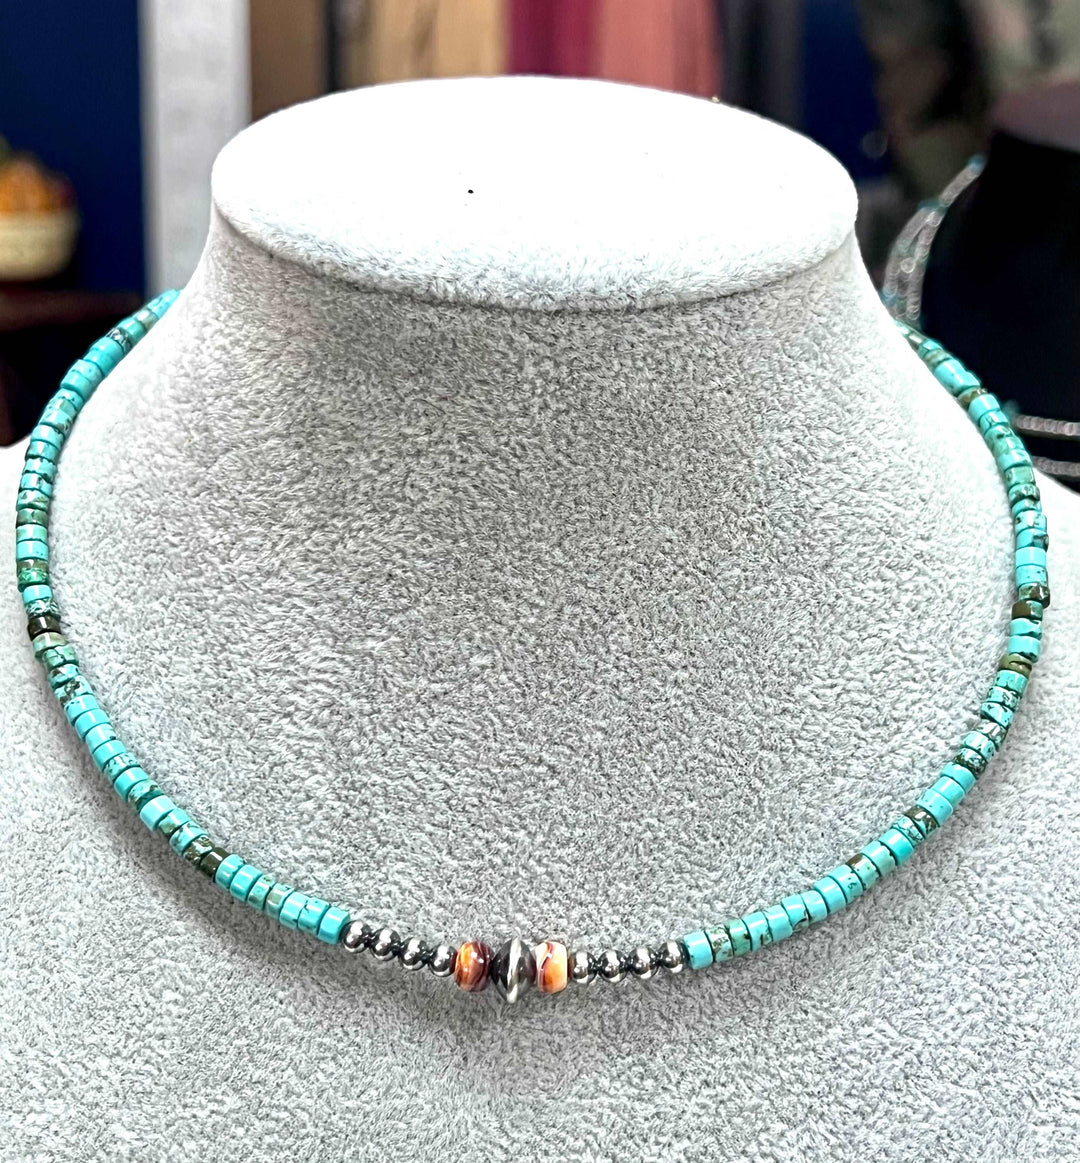 Real Navajo Choker with Composite Turquoise and Real Spiny Oysters